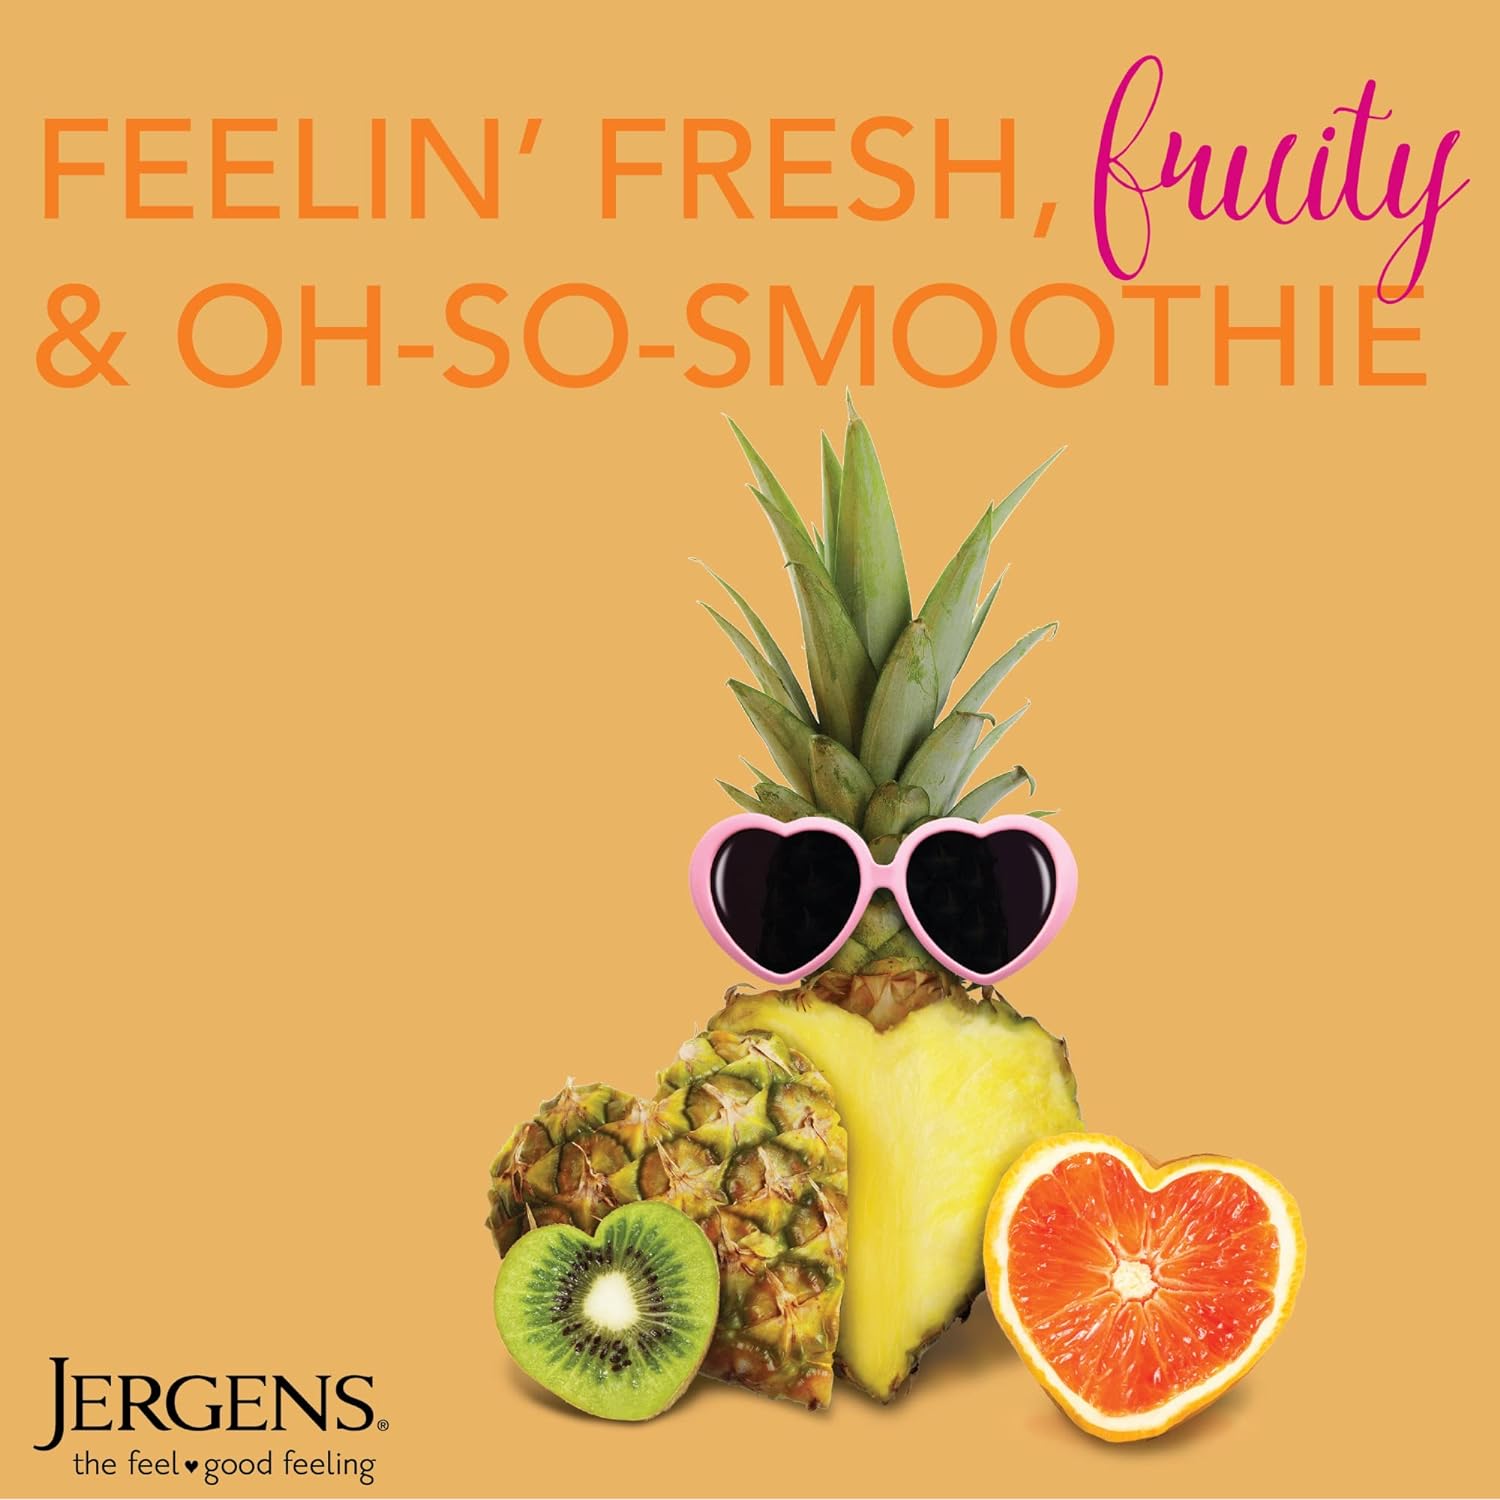 Jergens Skin Smoothie Body Lotion, Cucumber & Melon Scented Moisturizer, 24hr Hydration, Dye Free Formula, 10 Fl Oz (Pack of 3) : Beauty & Personal Care